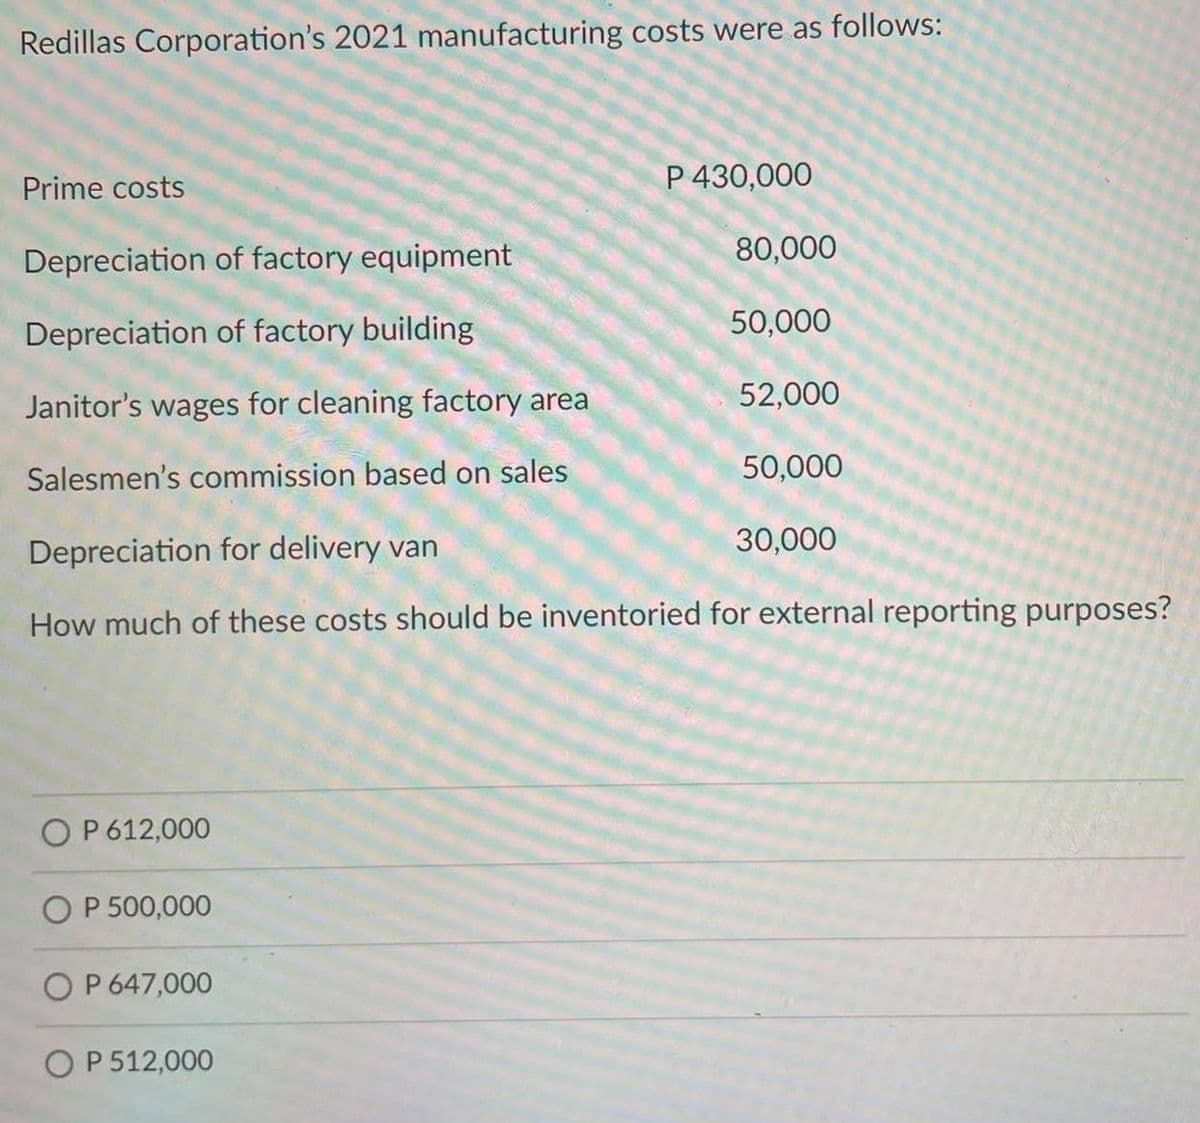 Redillas Corporation's 2021 manufacturing costs were as follows:
Prime costs
P 430,000
Depreciation of factory equipment
80,000
Depreciation of factory building
50,000
Janitor's wages for cleaning factory area
52,000
Salesmen's commission based on sales
50,000
Depreciation for delivery van
30,000
How much of these costs should be inventoried for external reporting purposes?
O P 612,000
O P 500,000
OP 647,000
OP 512,000
